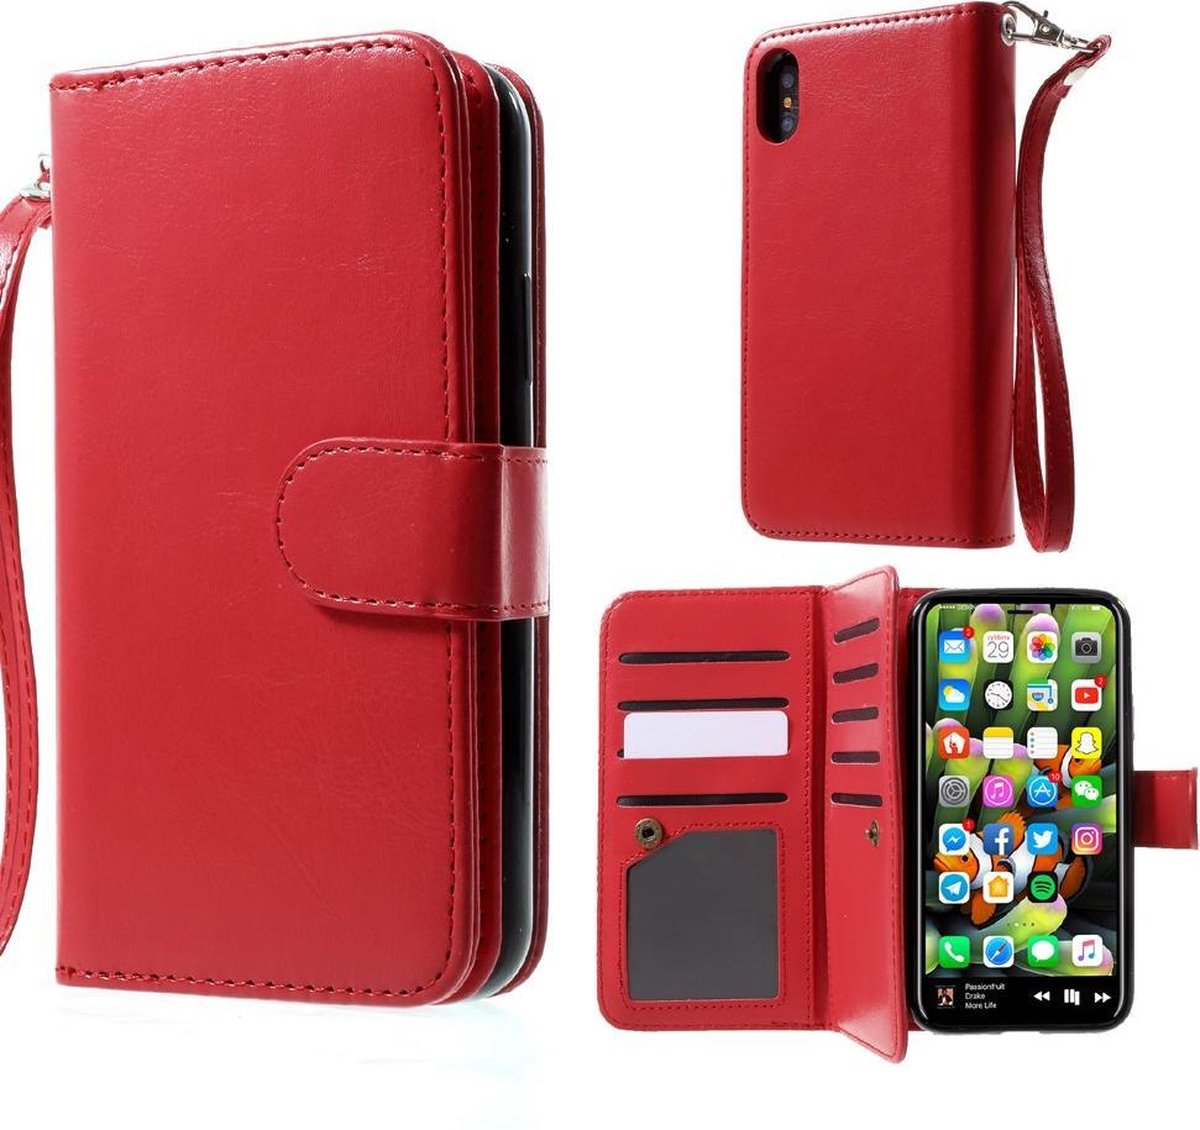 2-in-1 Wallet Case - Iphone X/XS Hoesje - Rood - Crazy Horse